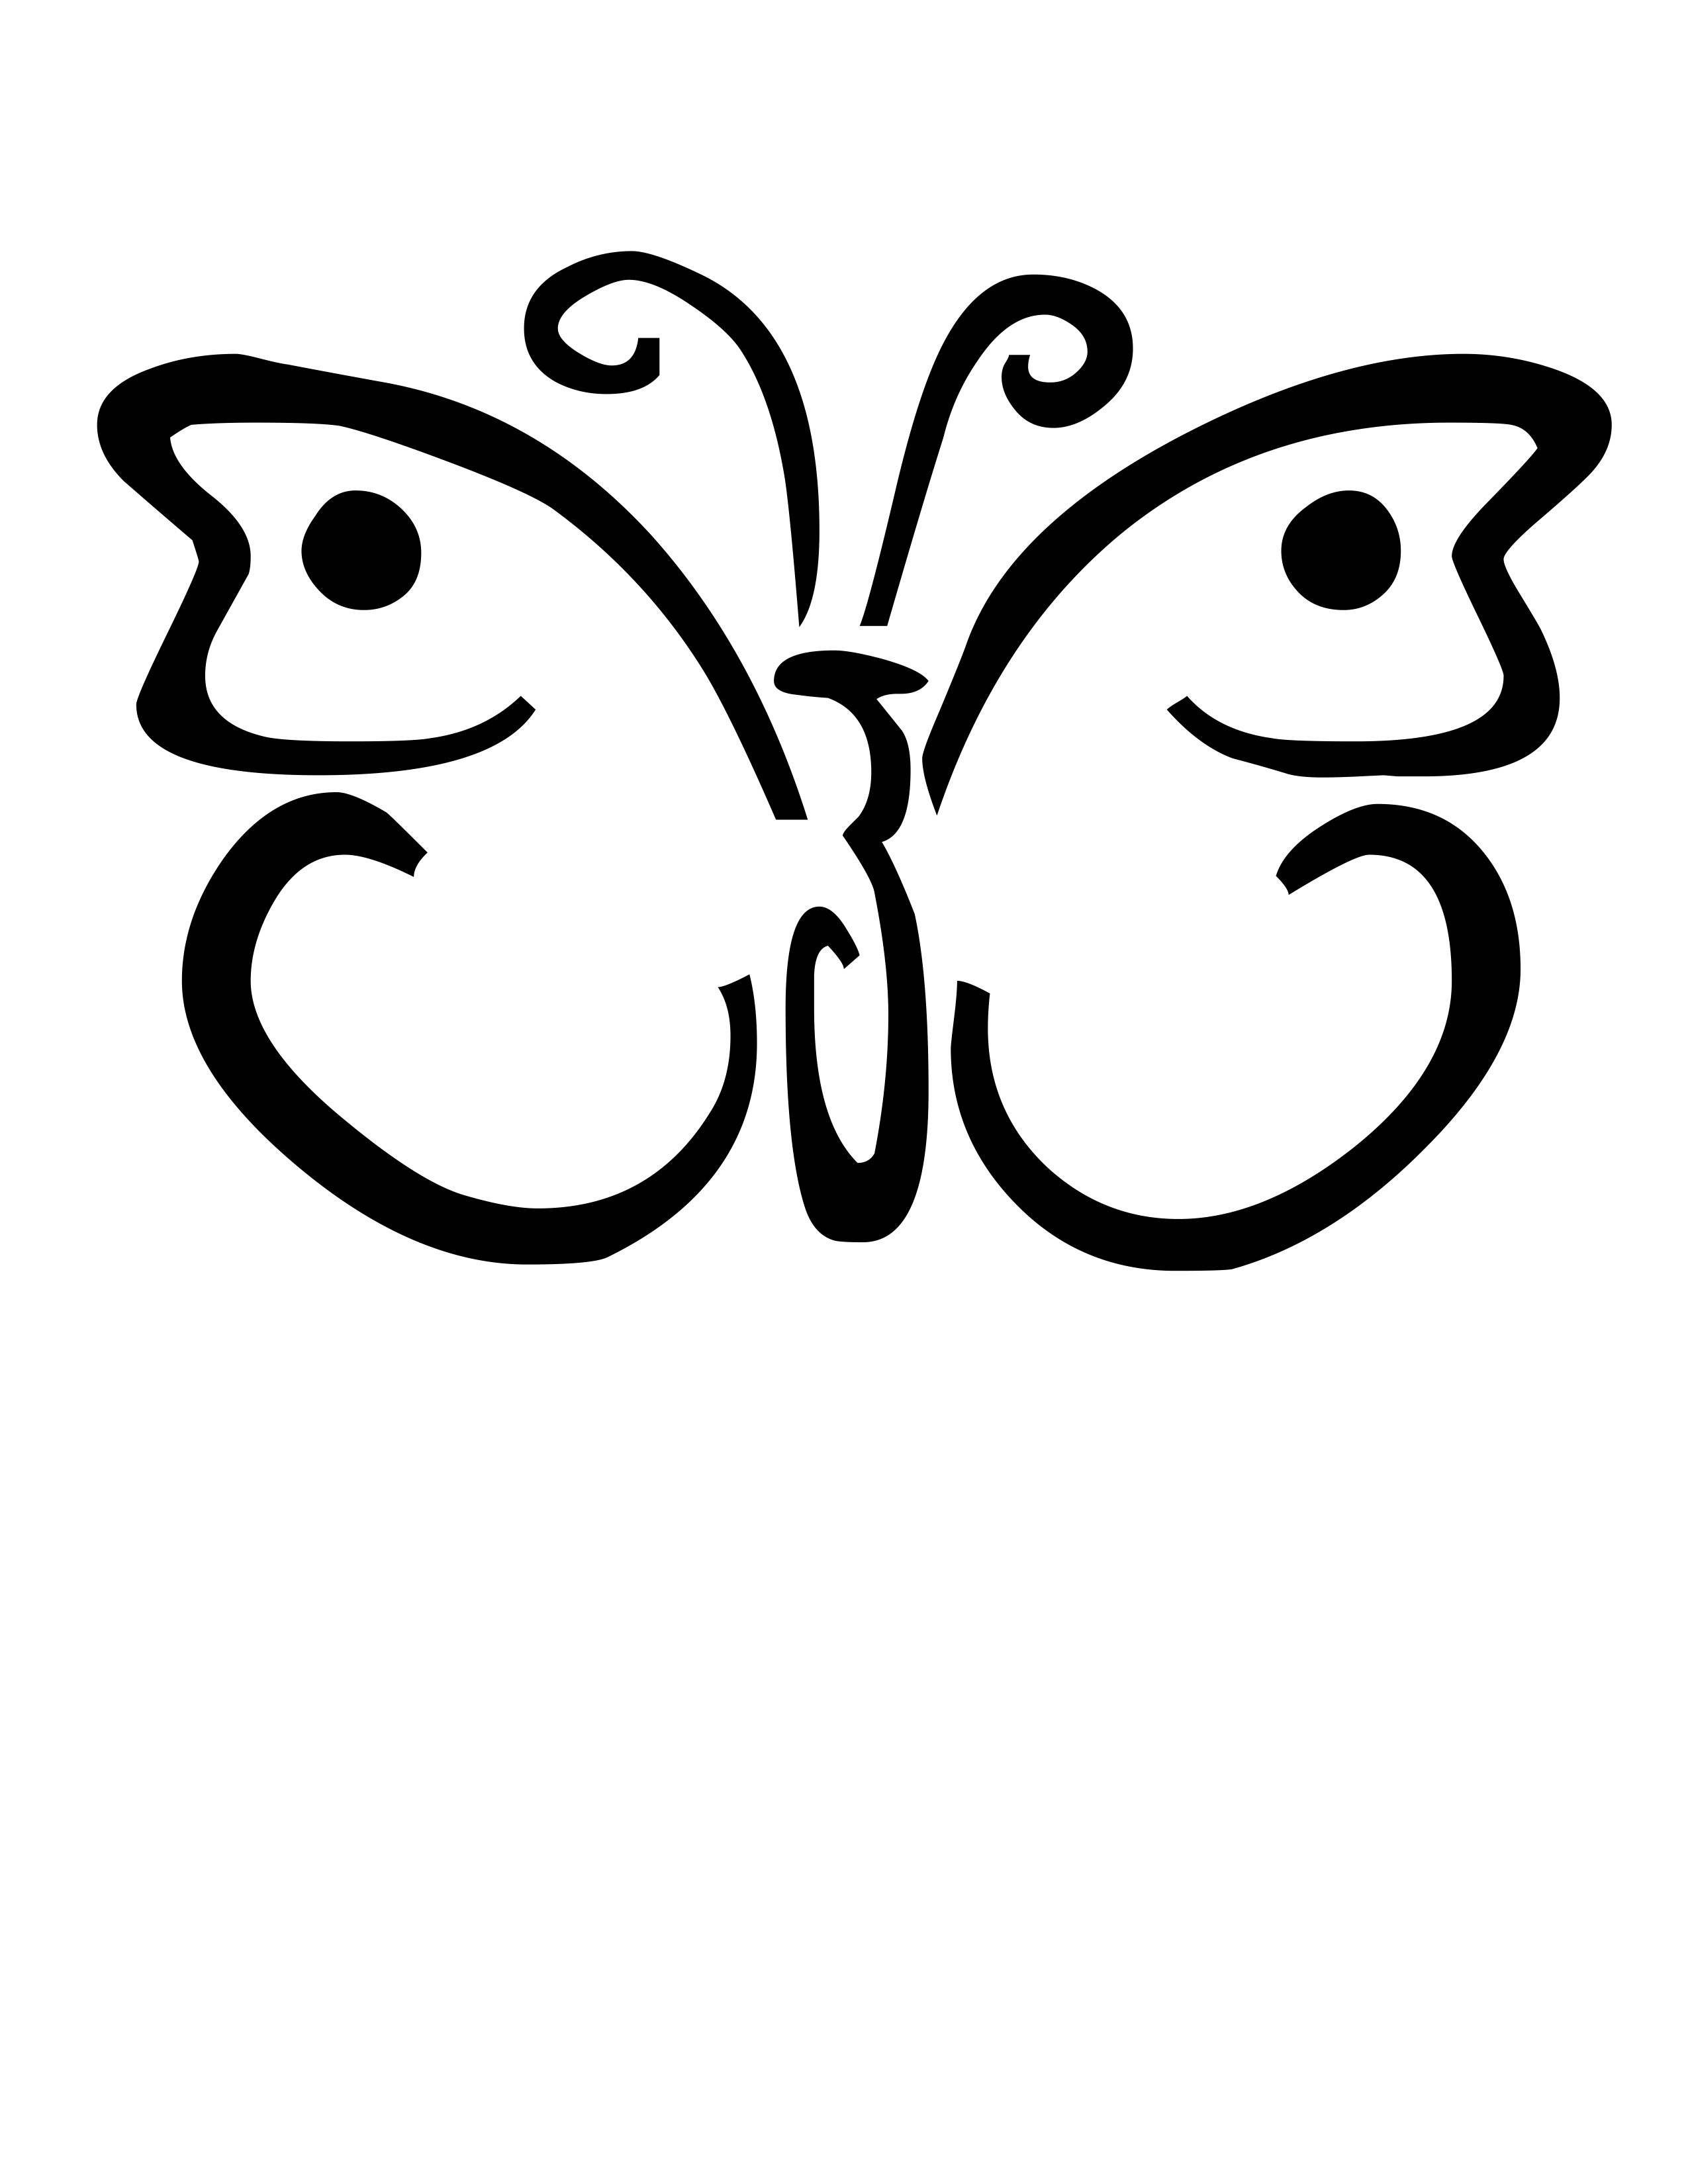 Butterfly Graphic - ClipArt Best